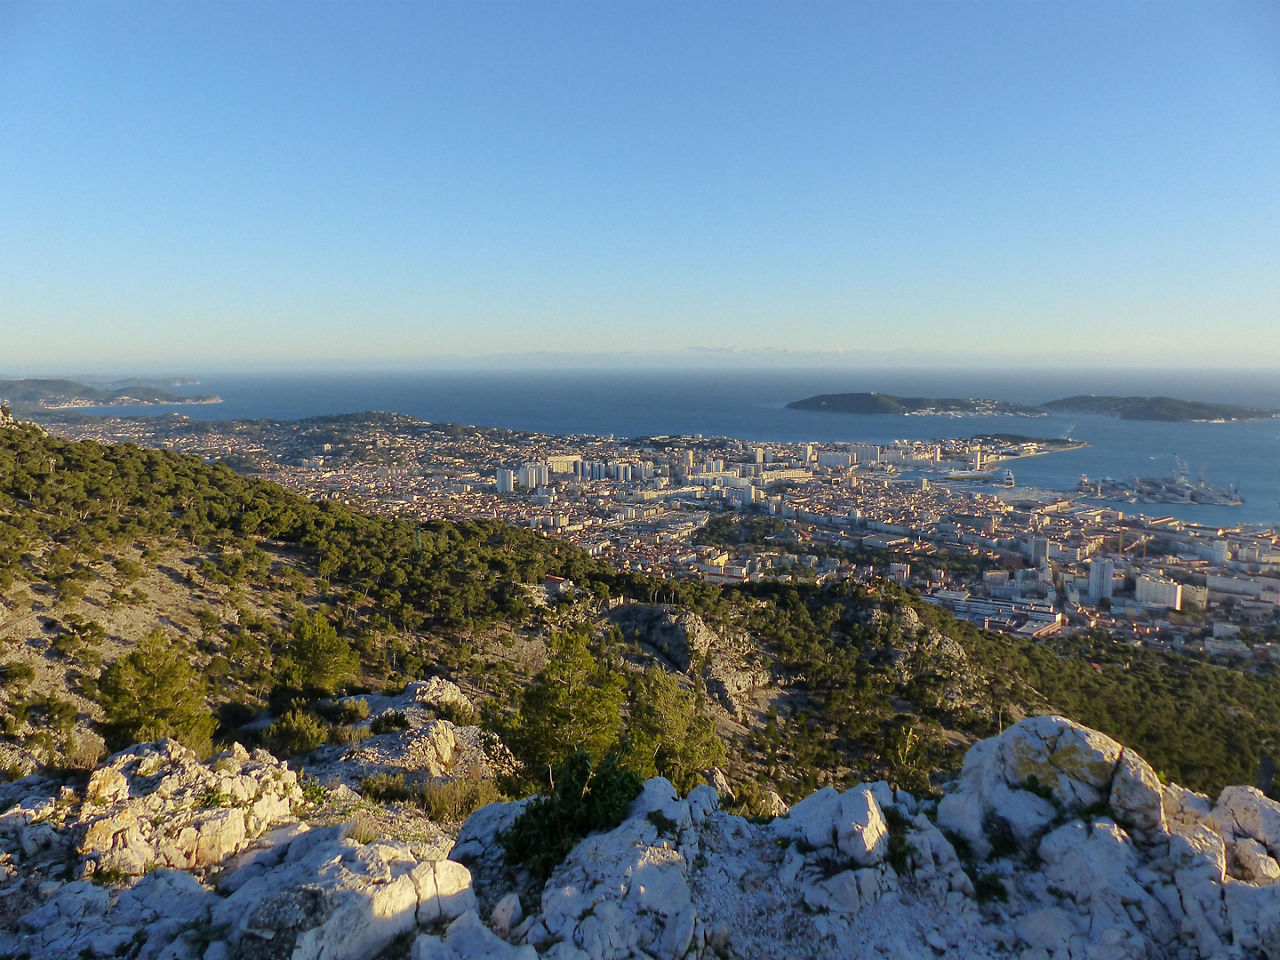 Panoramic view of Toulon, France